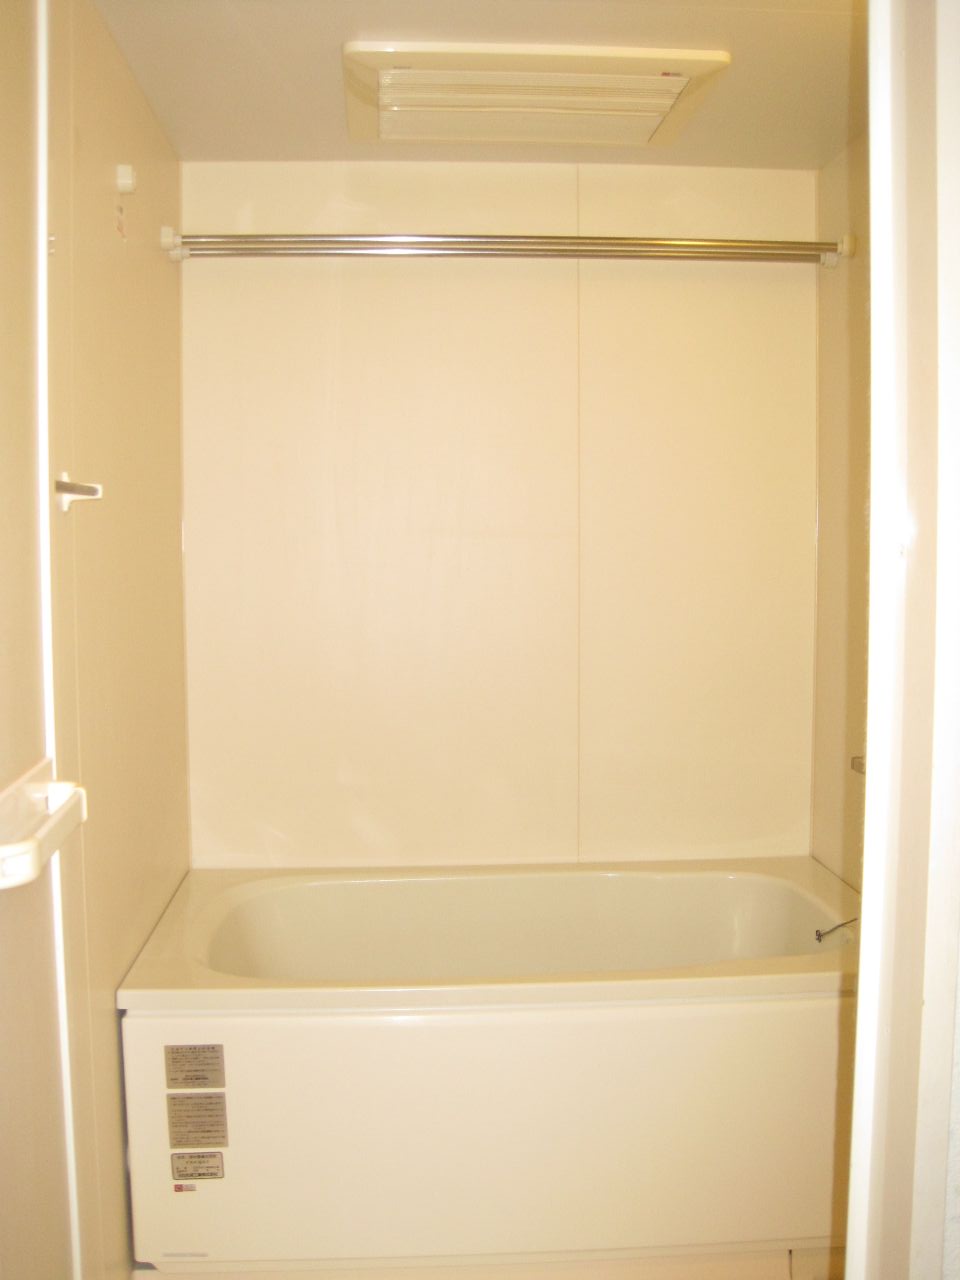 Bath. Bathroom Dryer Reheating function Automatic hot water clad function